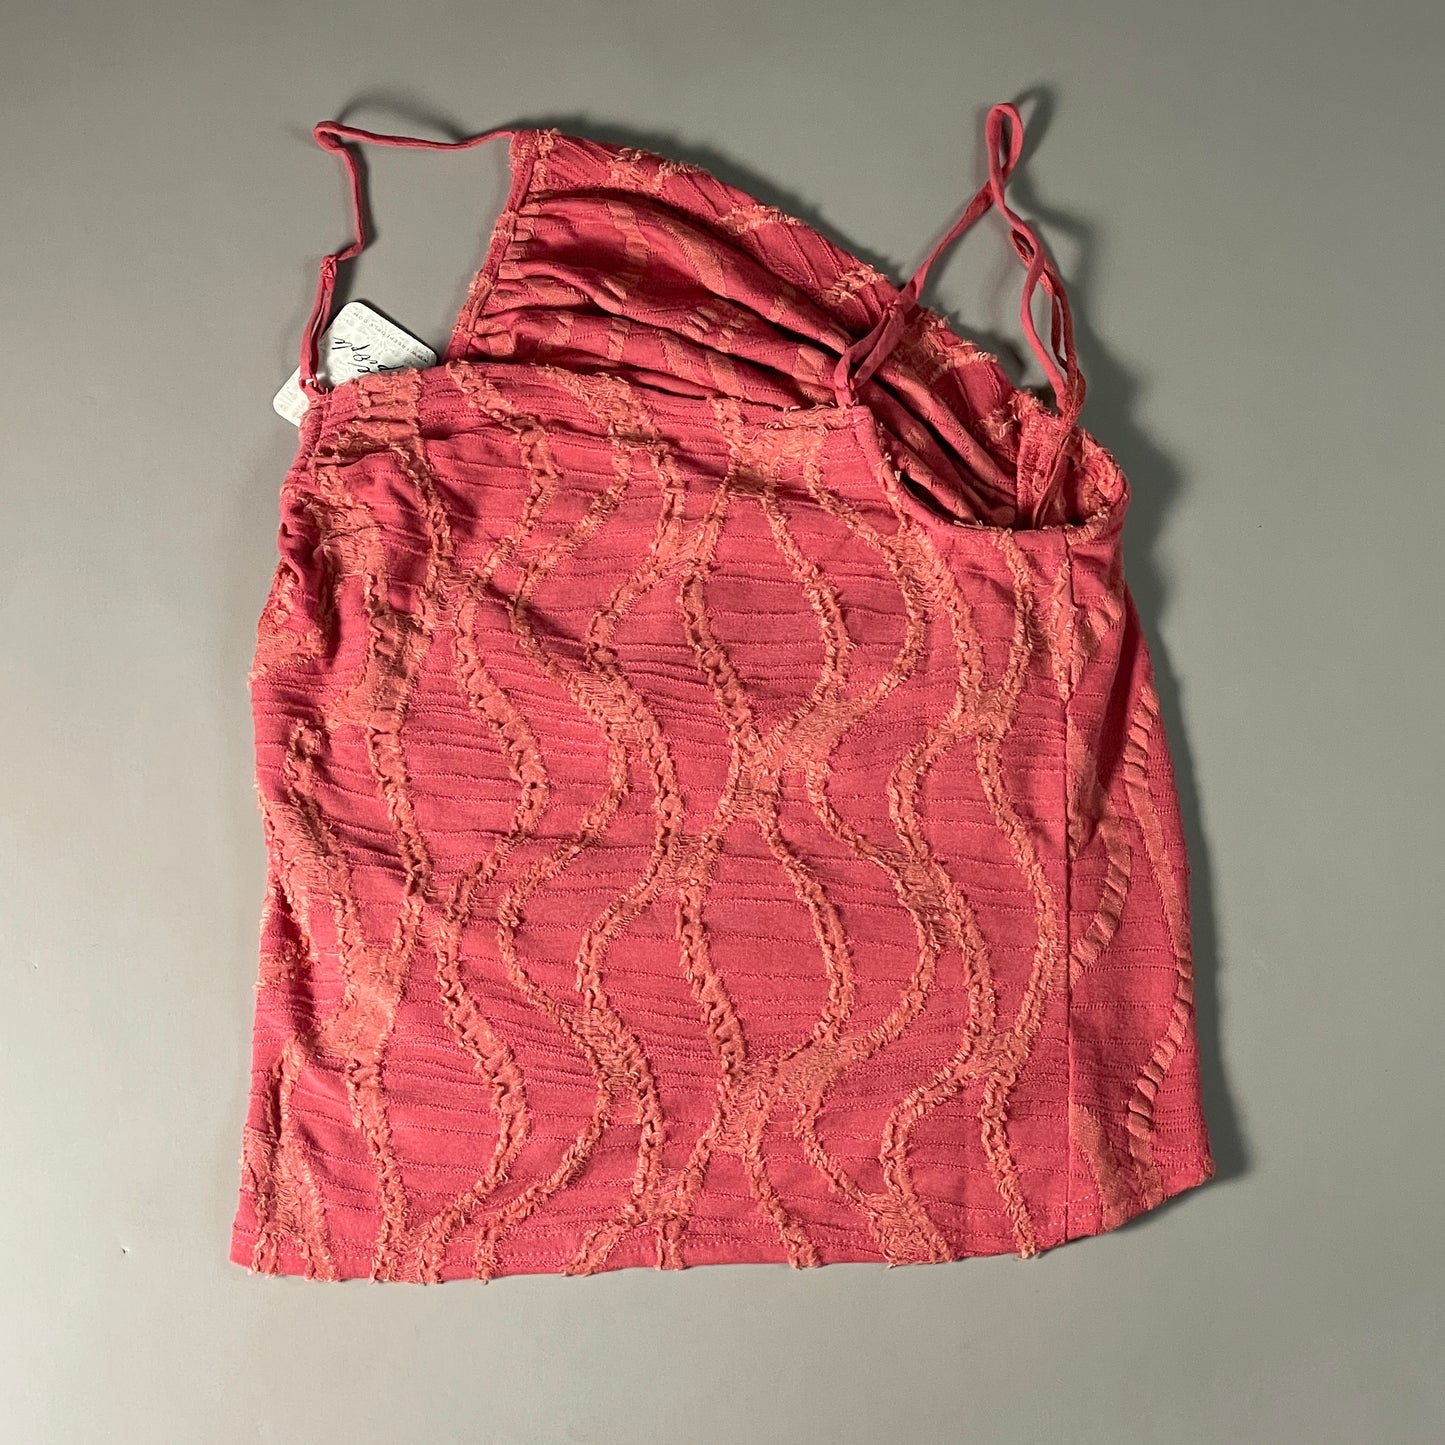 FREE PEOPLE Sand Dunes Tank Top Women's Sz S Red Clover OB1410088 (New)